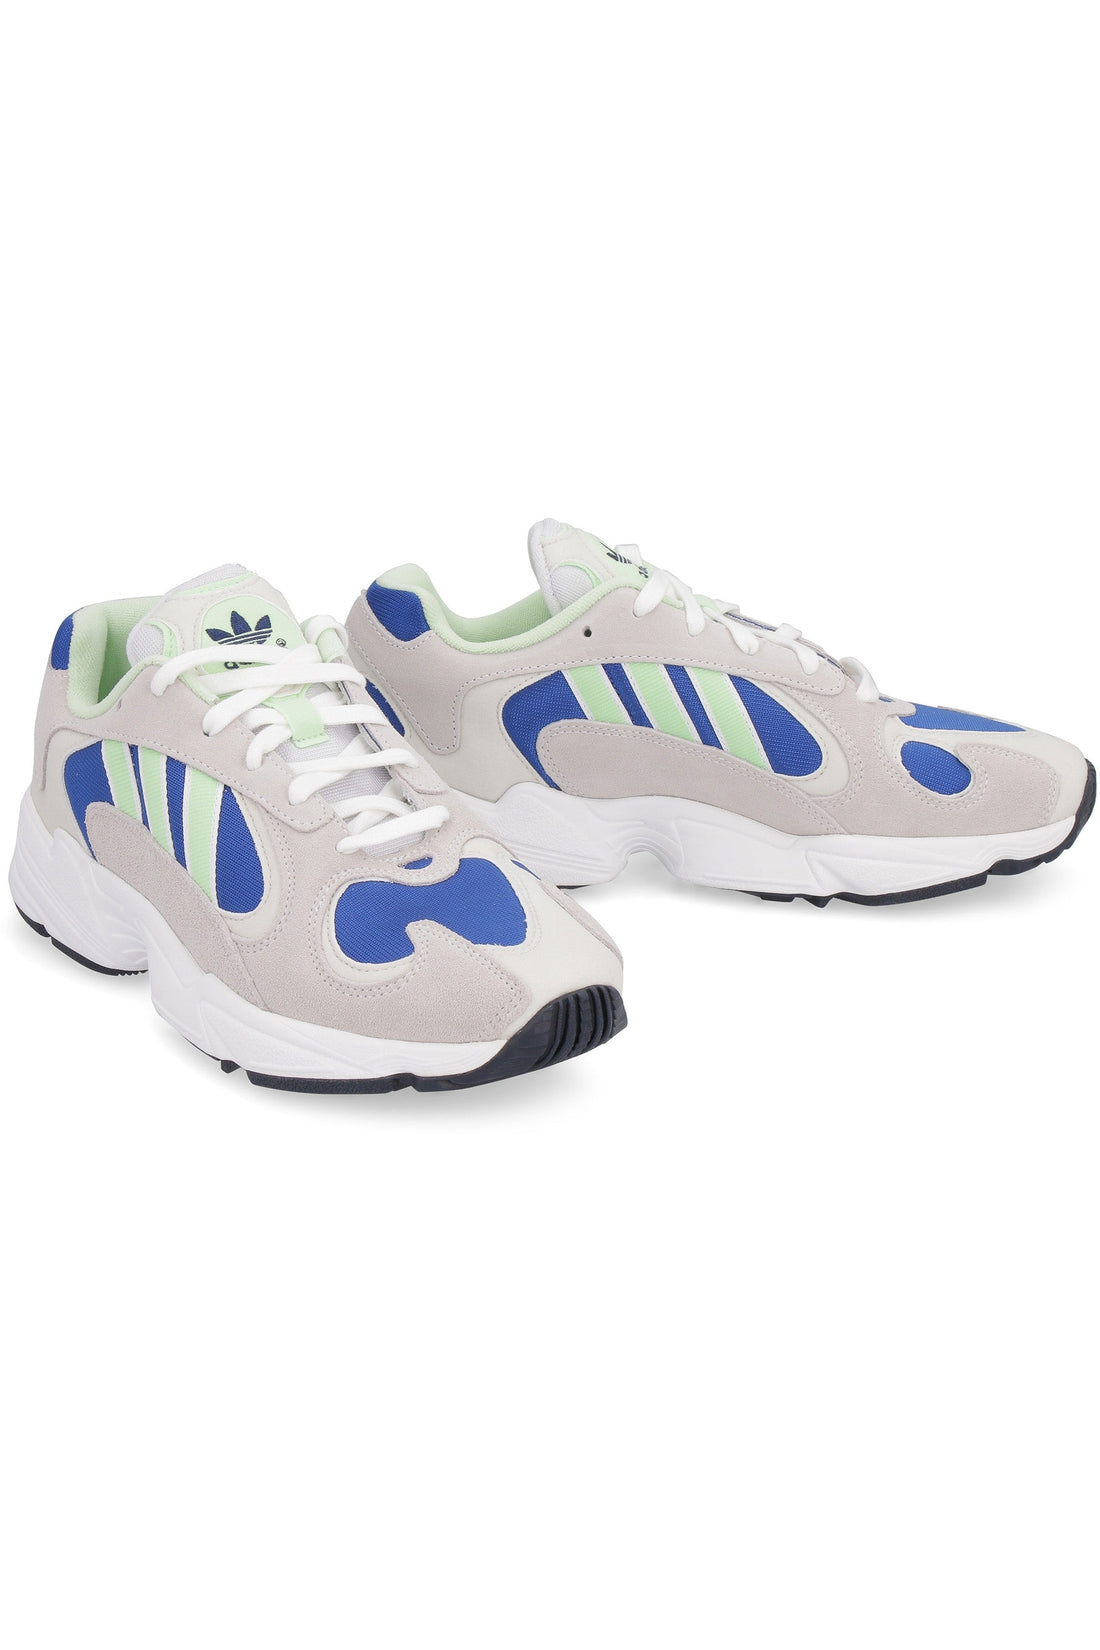 adidas-OUTLET-SALE-Yung-1 low-top sneakers-ARCHIVIST